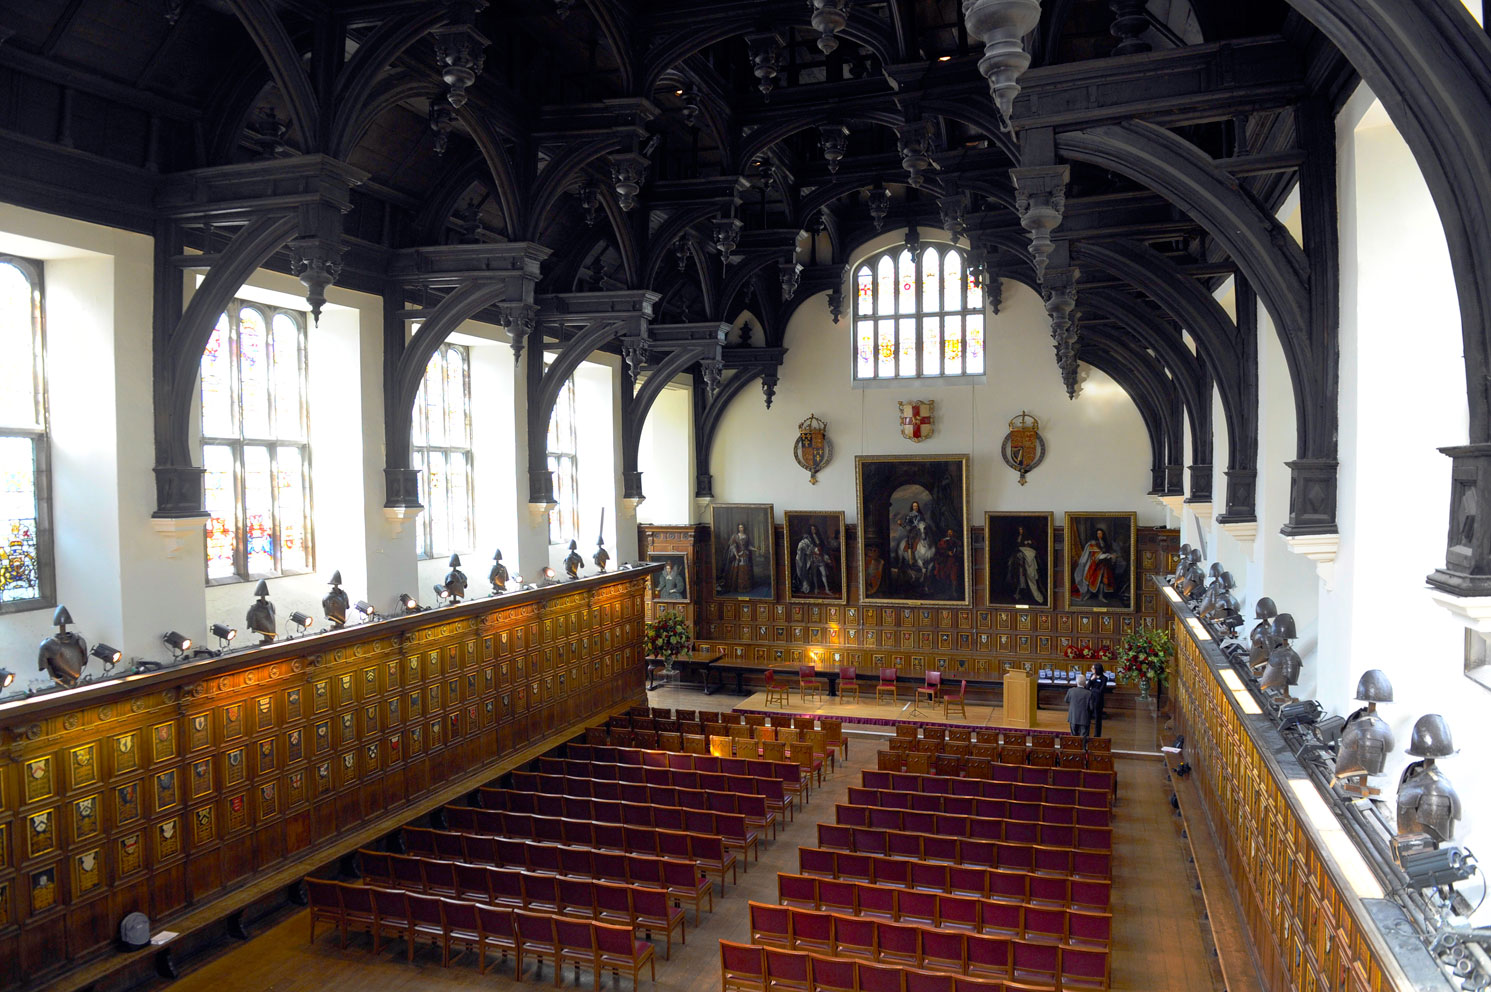 Photo of Award ceremony set-up in 15th Century grand hall